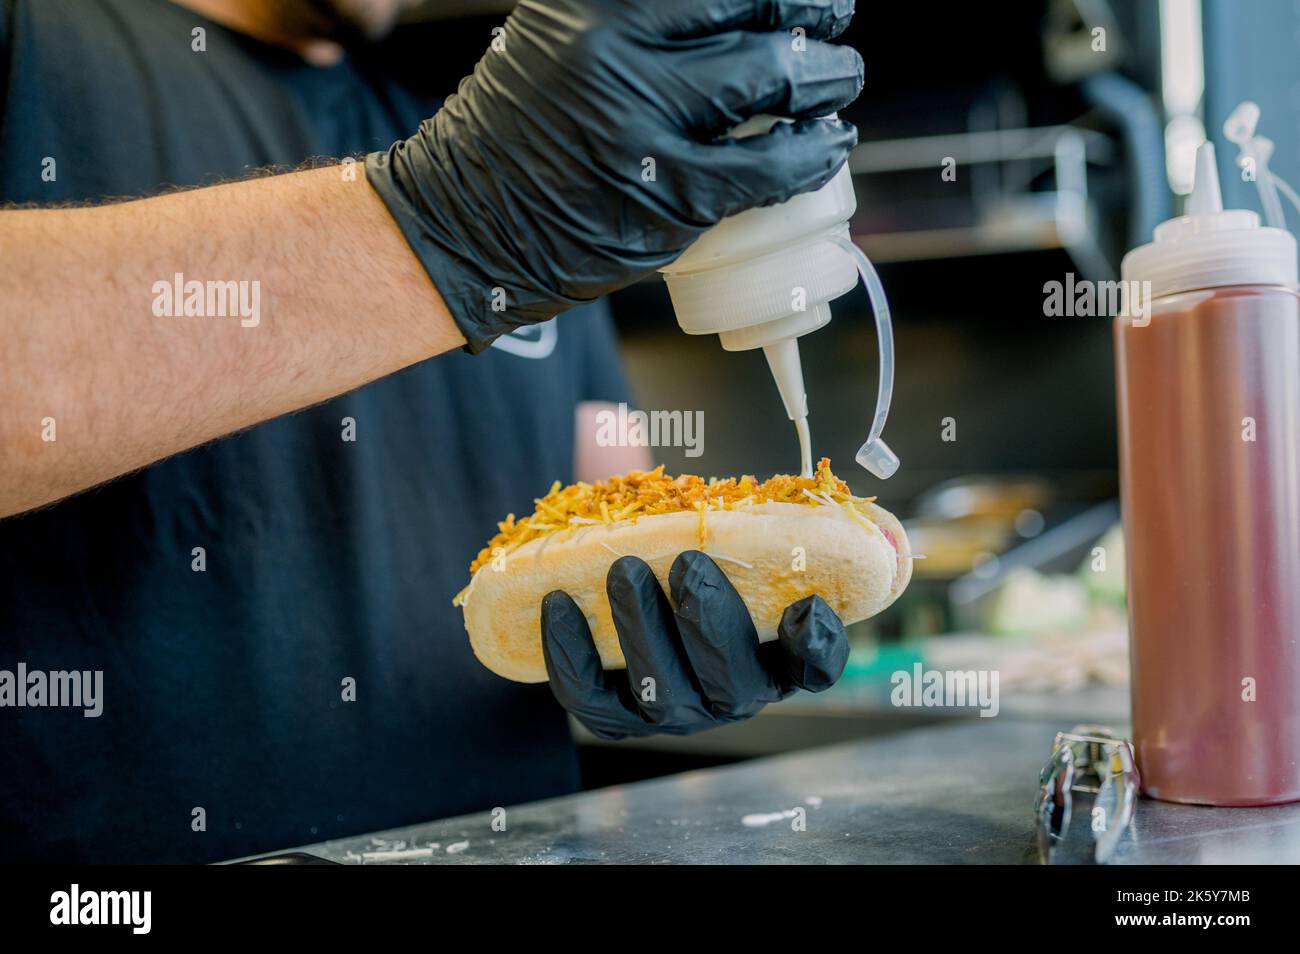 Unrecognizable street food vendor pouring sauce on hot dog Stock Photo